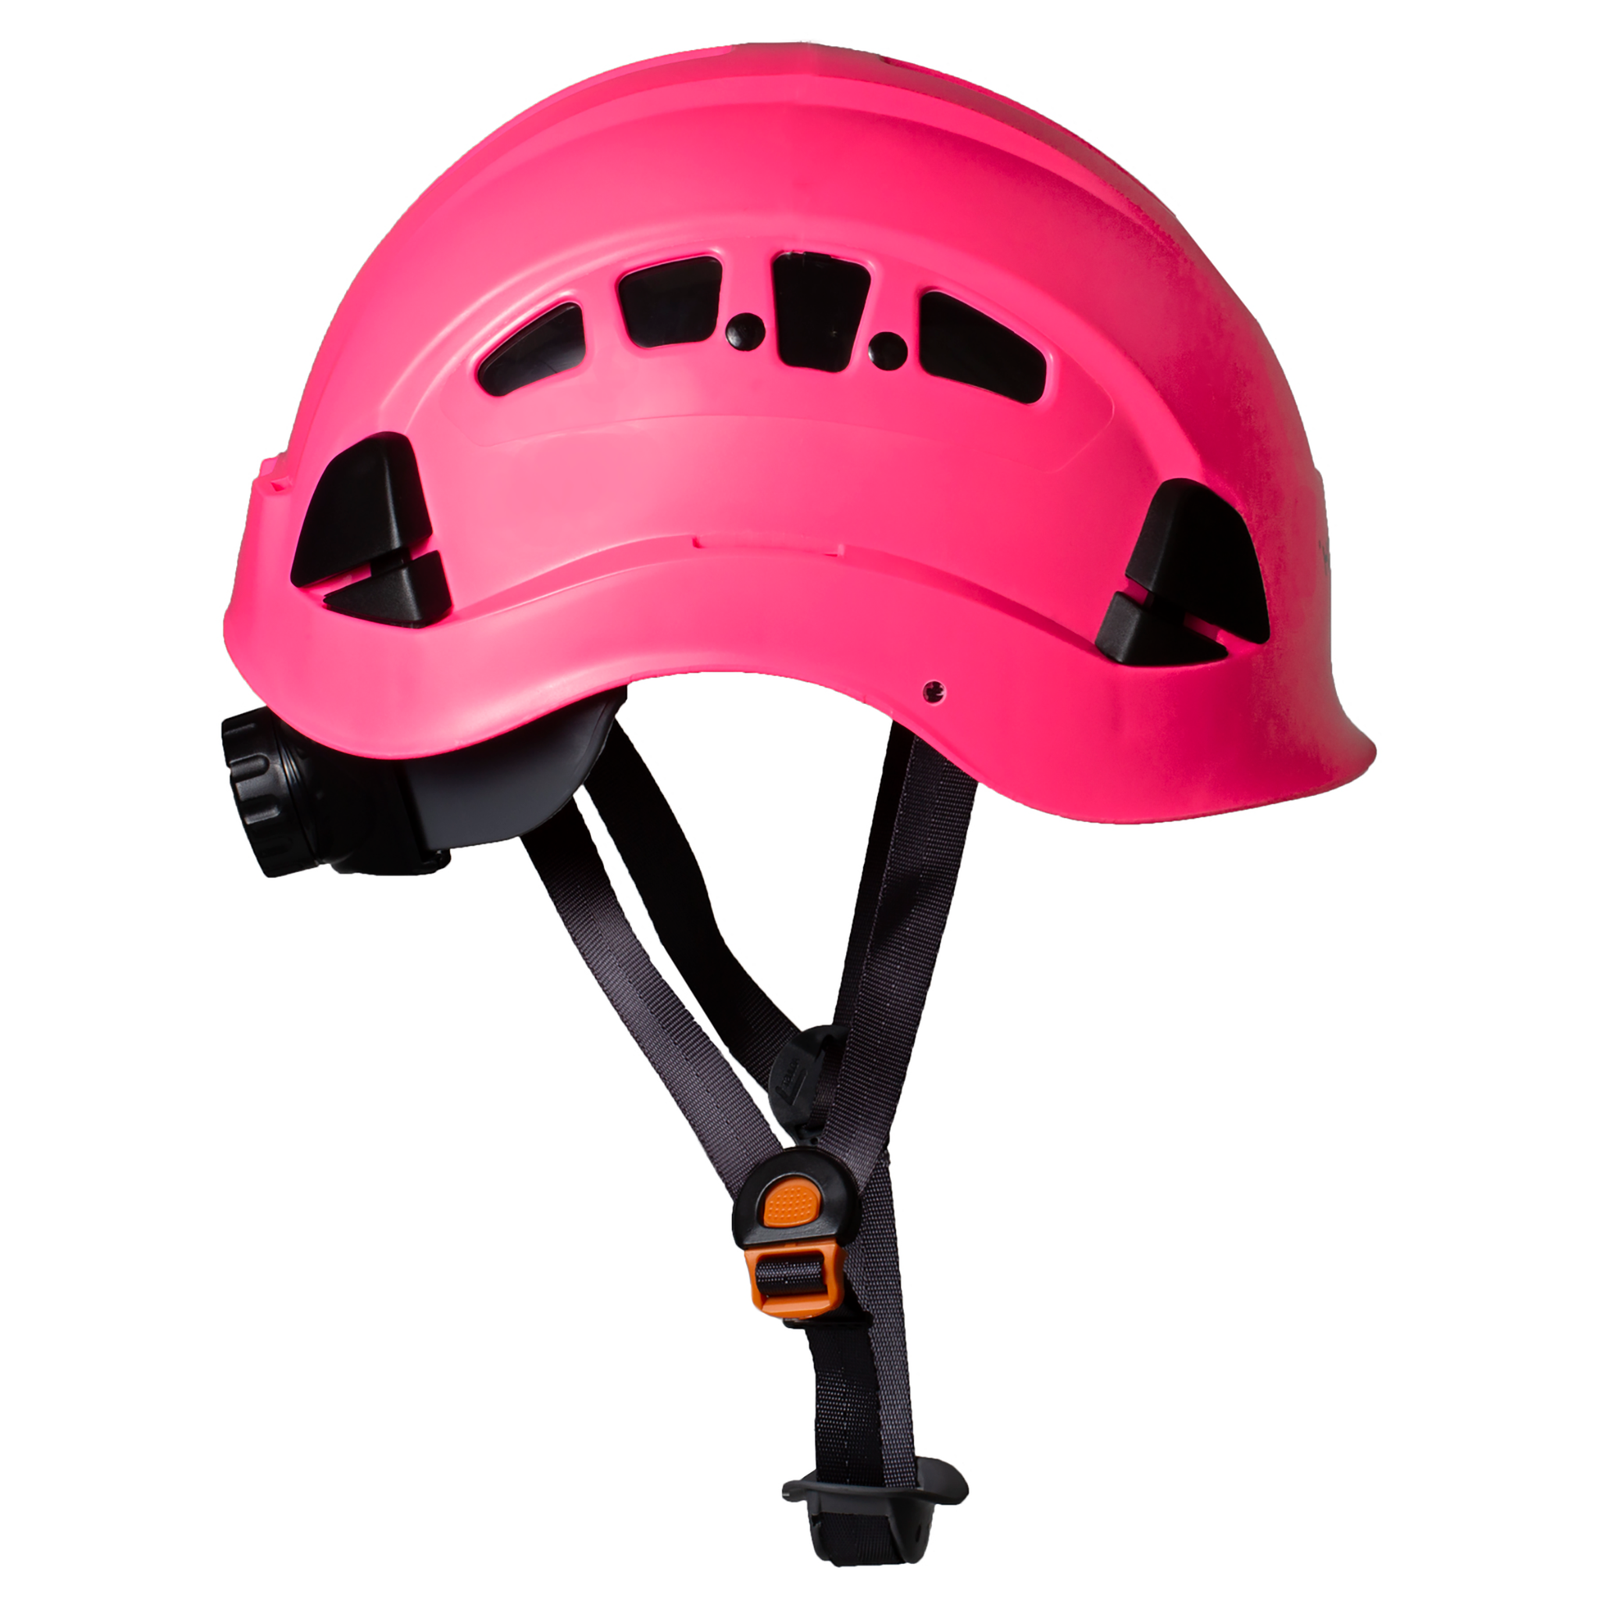 Side view of the Jorestech pink ventilated rescue hard hat Type 1 Class Cwith adjustable 6 point suspension and black chin strap